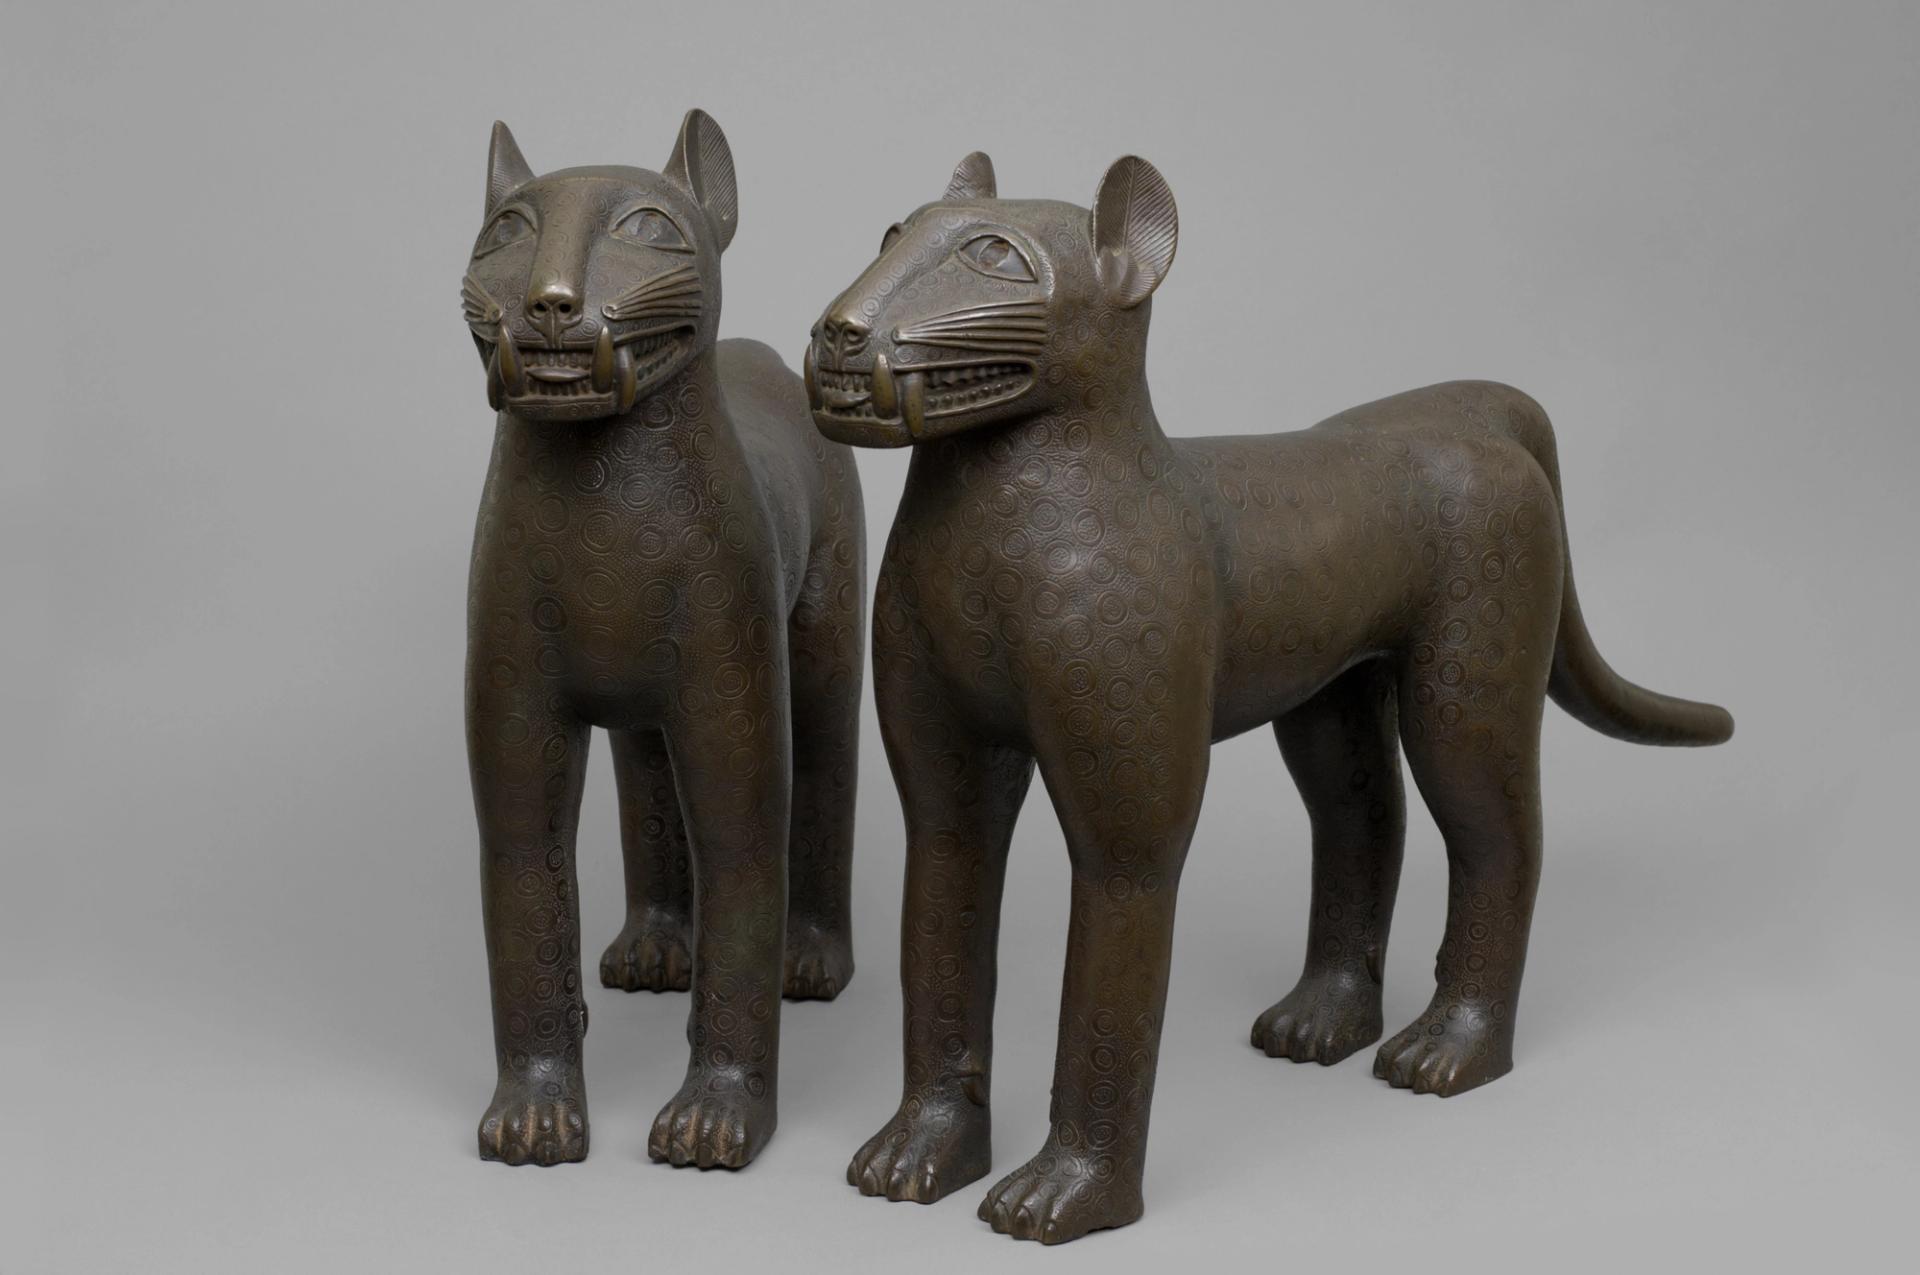 Pair of Leopards, part of the 'Digital Benin' catalogue Inv. No. LG 1952.13.1, LG 1952.13.2 © The National Commission for Museums and Monuments, Nigeria. Photo: Georg Molterer 